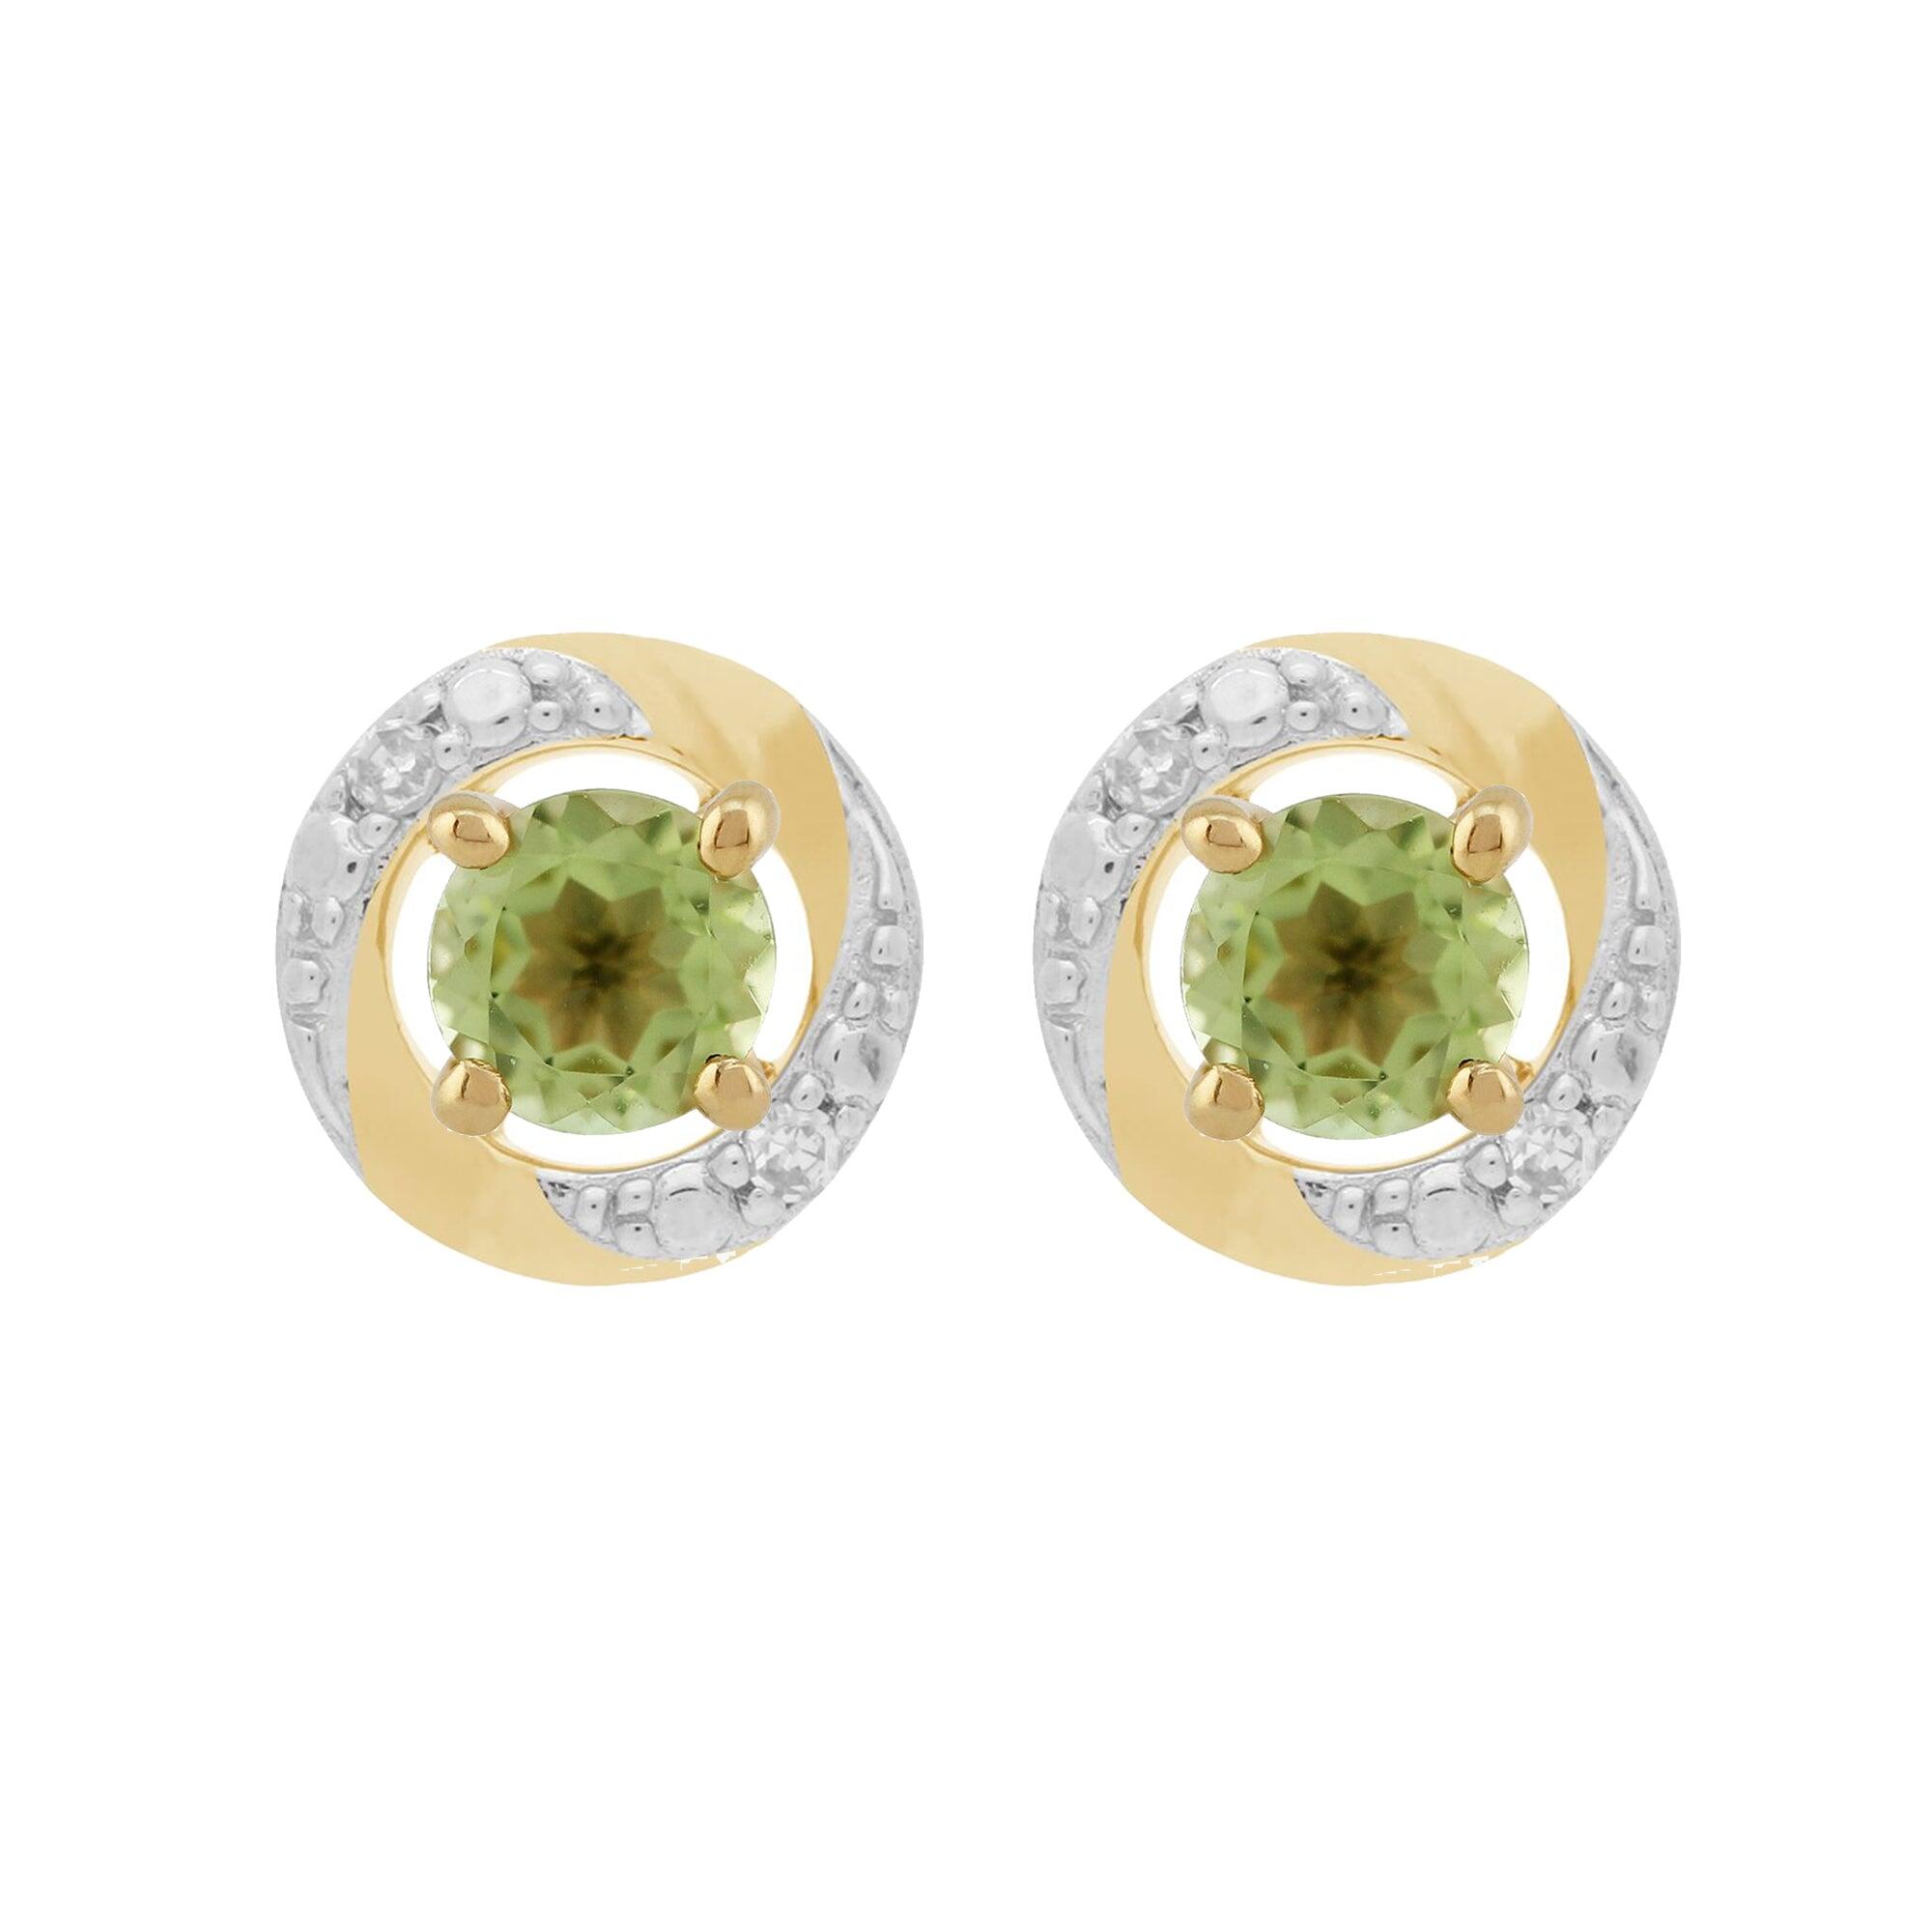 Classic Round Peridot Stud Earrings with Detachable Diamond Halo Ear Jacket in 9ct Yellow Gold